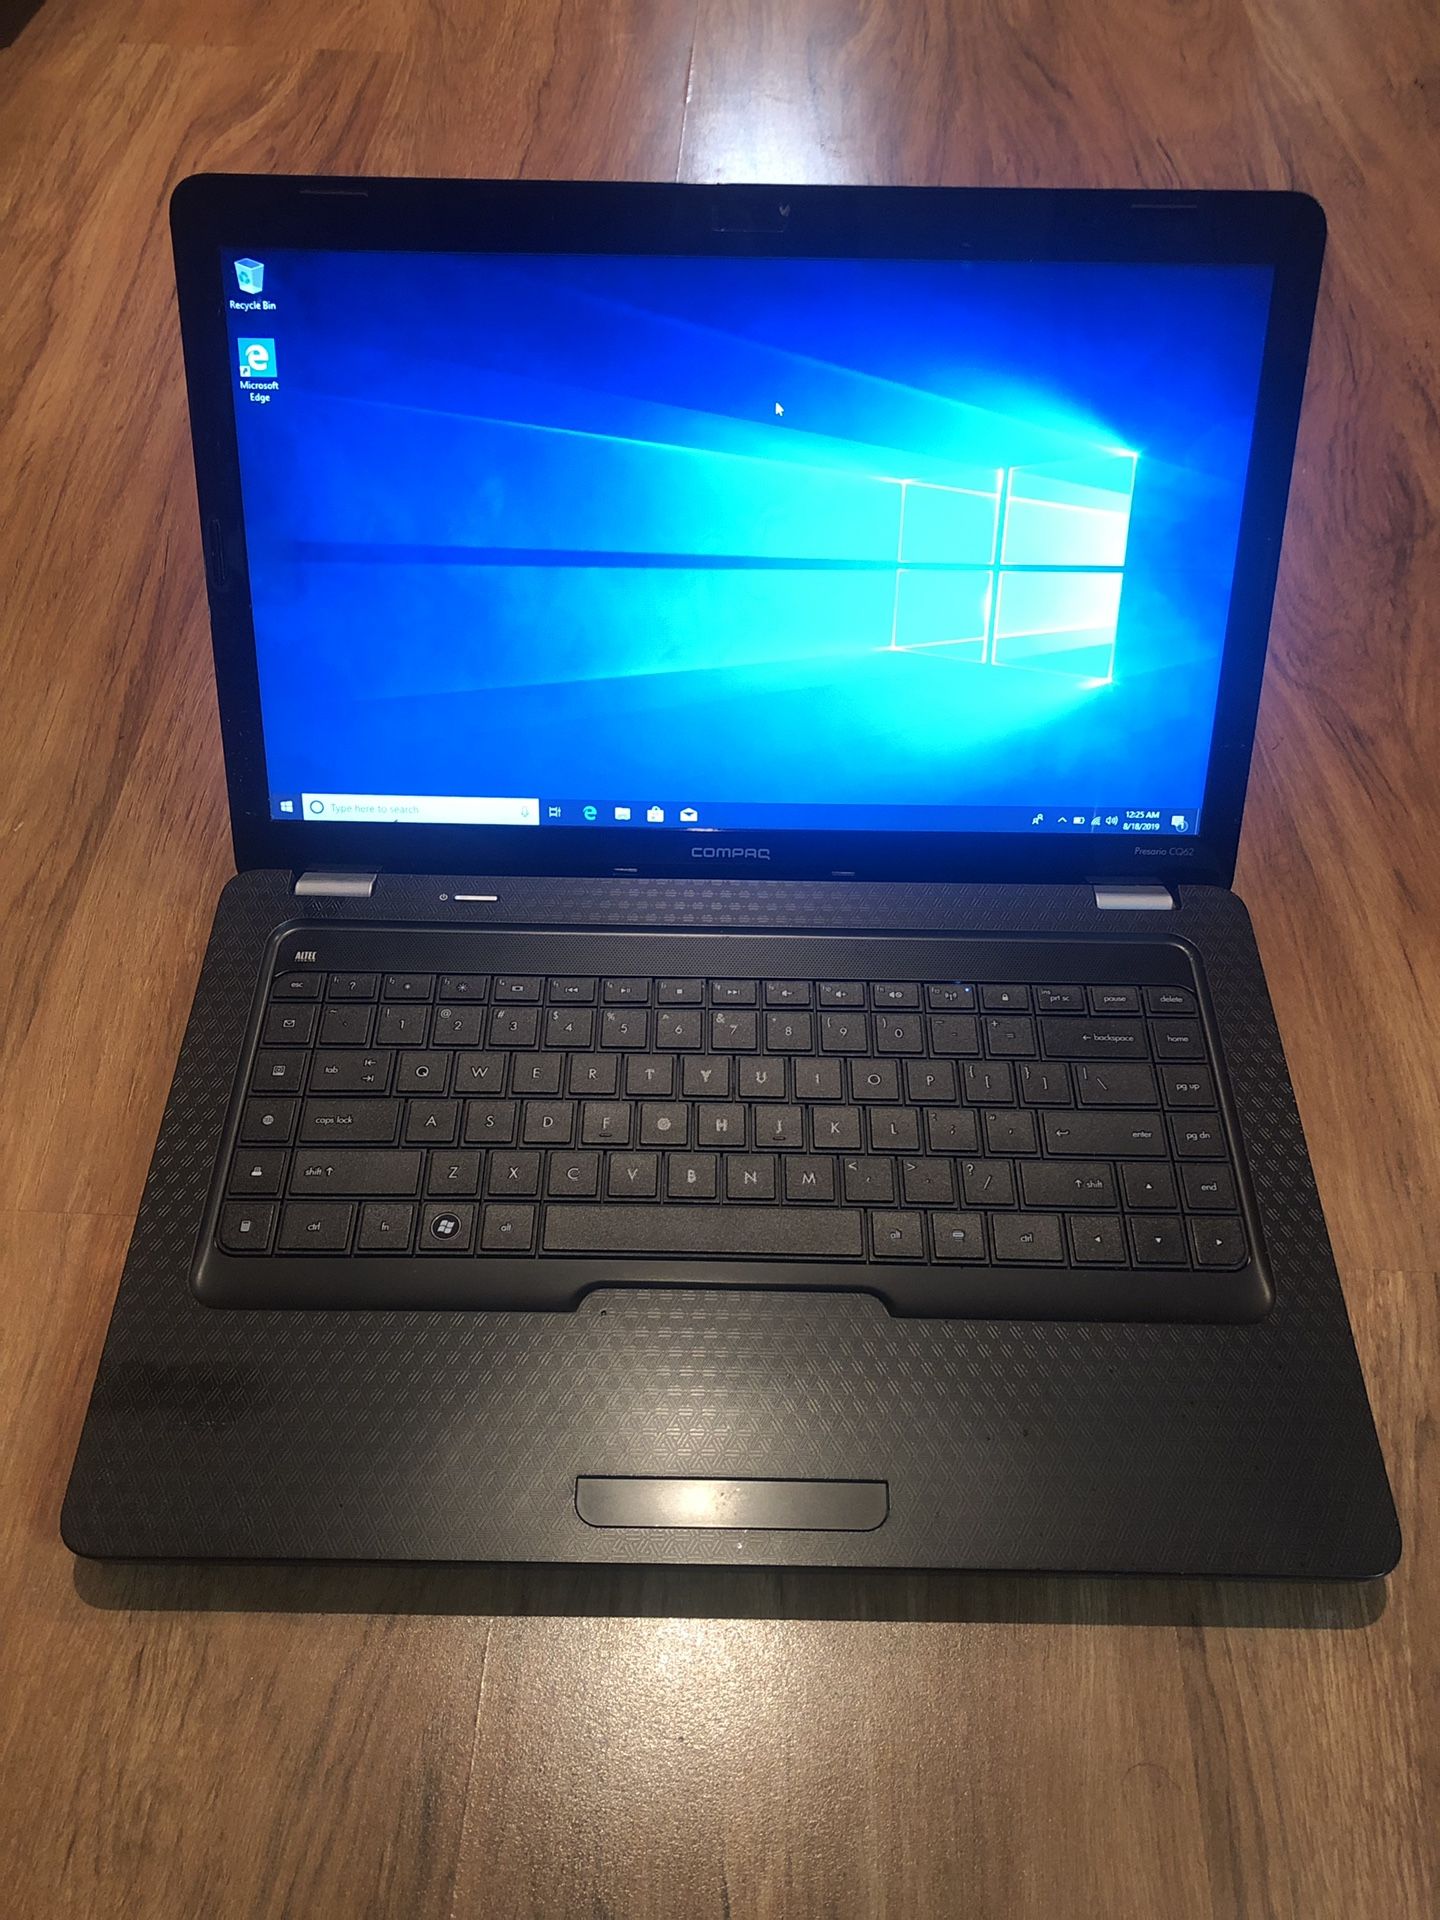 Compaq Presario CQ62 4GB Ram 160GB Hard Drive 15.6 inch Windows 10 Pro Laptop with charger in Excellent Working condition!!!!!!!!